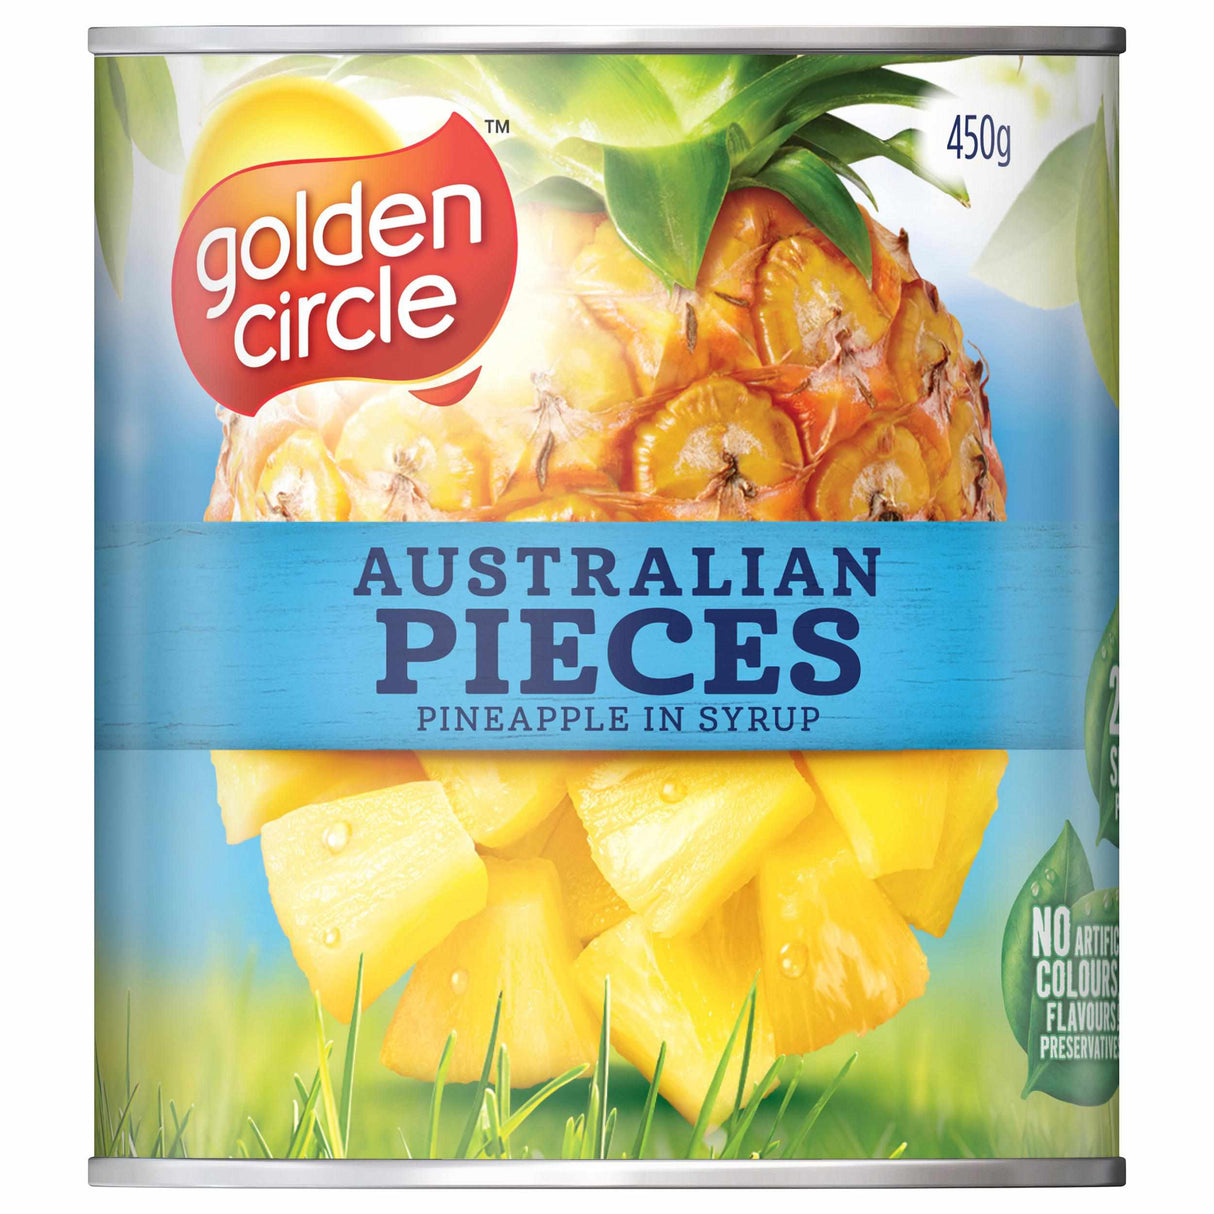 Golden Circle Pineapple Pieces in Syrup 450g